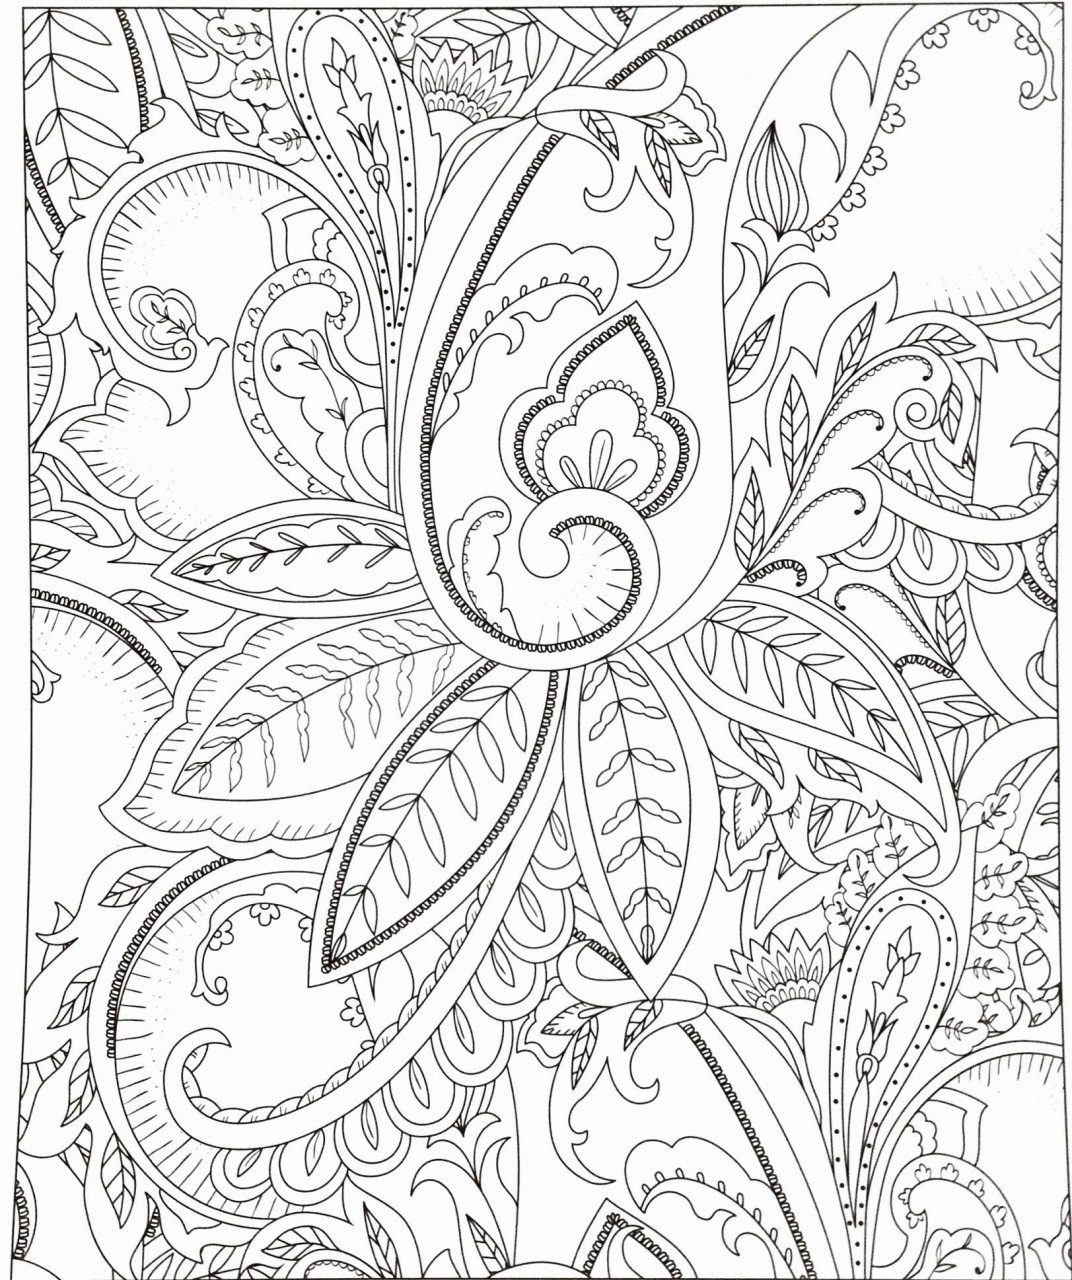 Saraswati Coloring Pages Hewlett Packard Coloring Pages Lovely Paw Patrol Color Pages Lovely